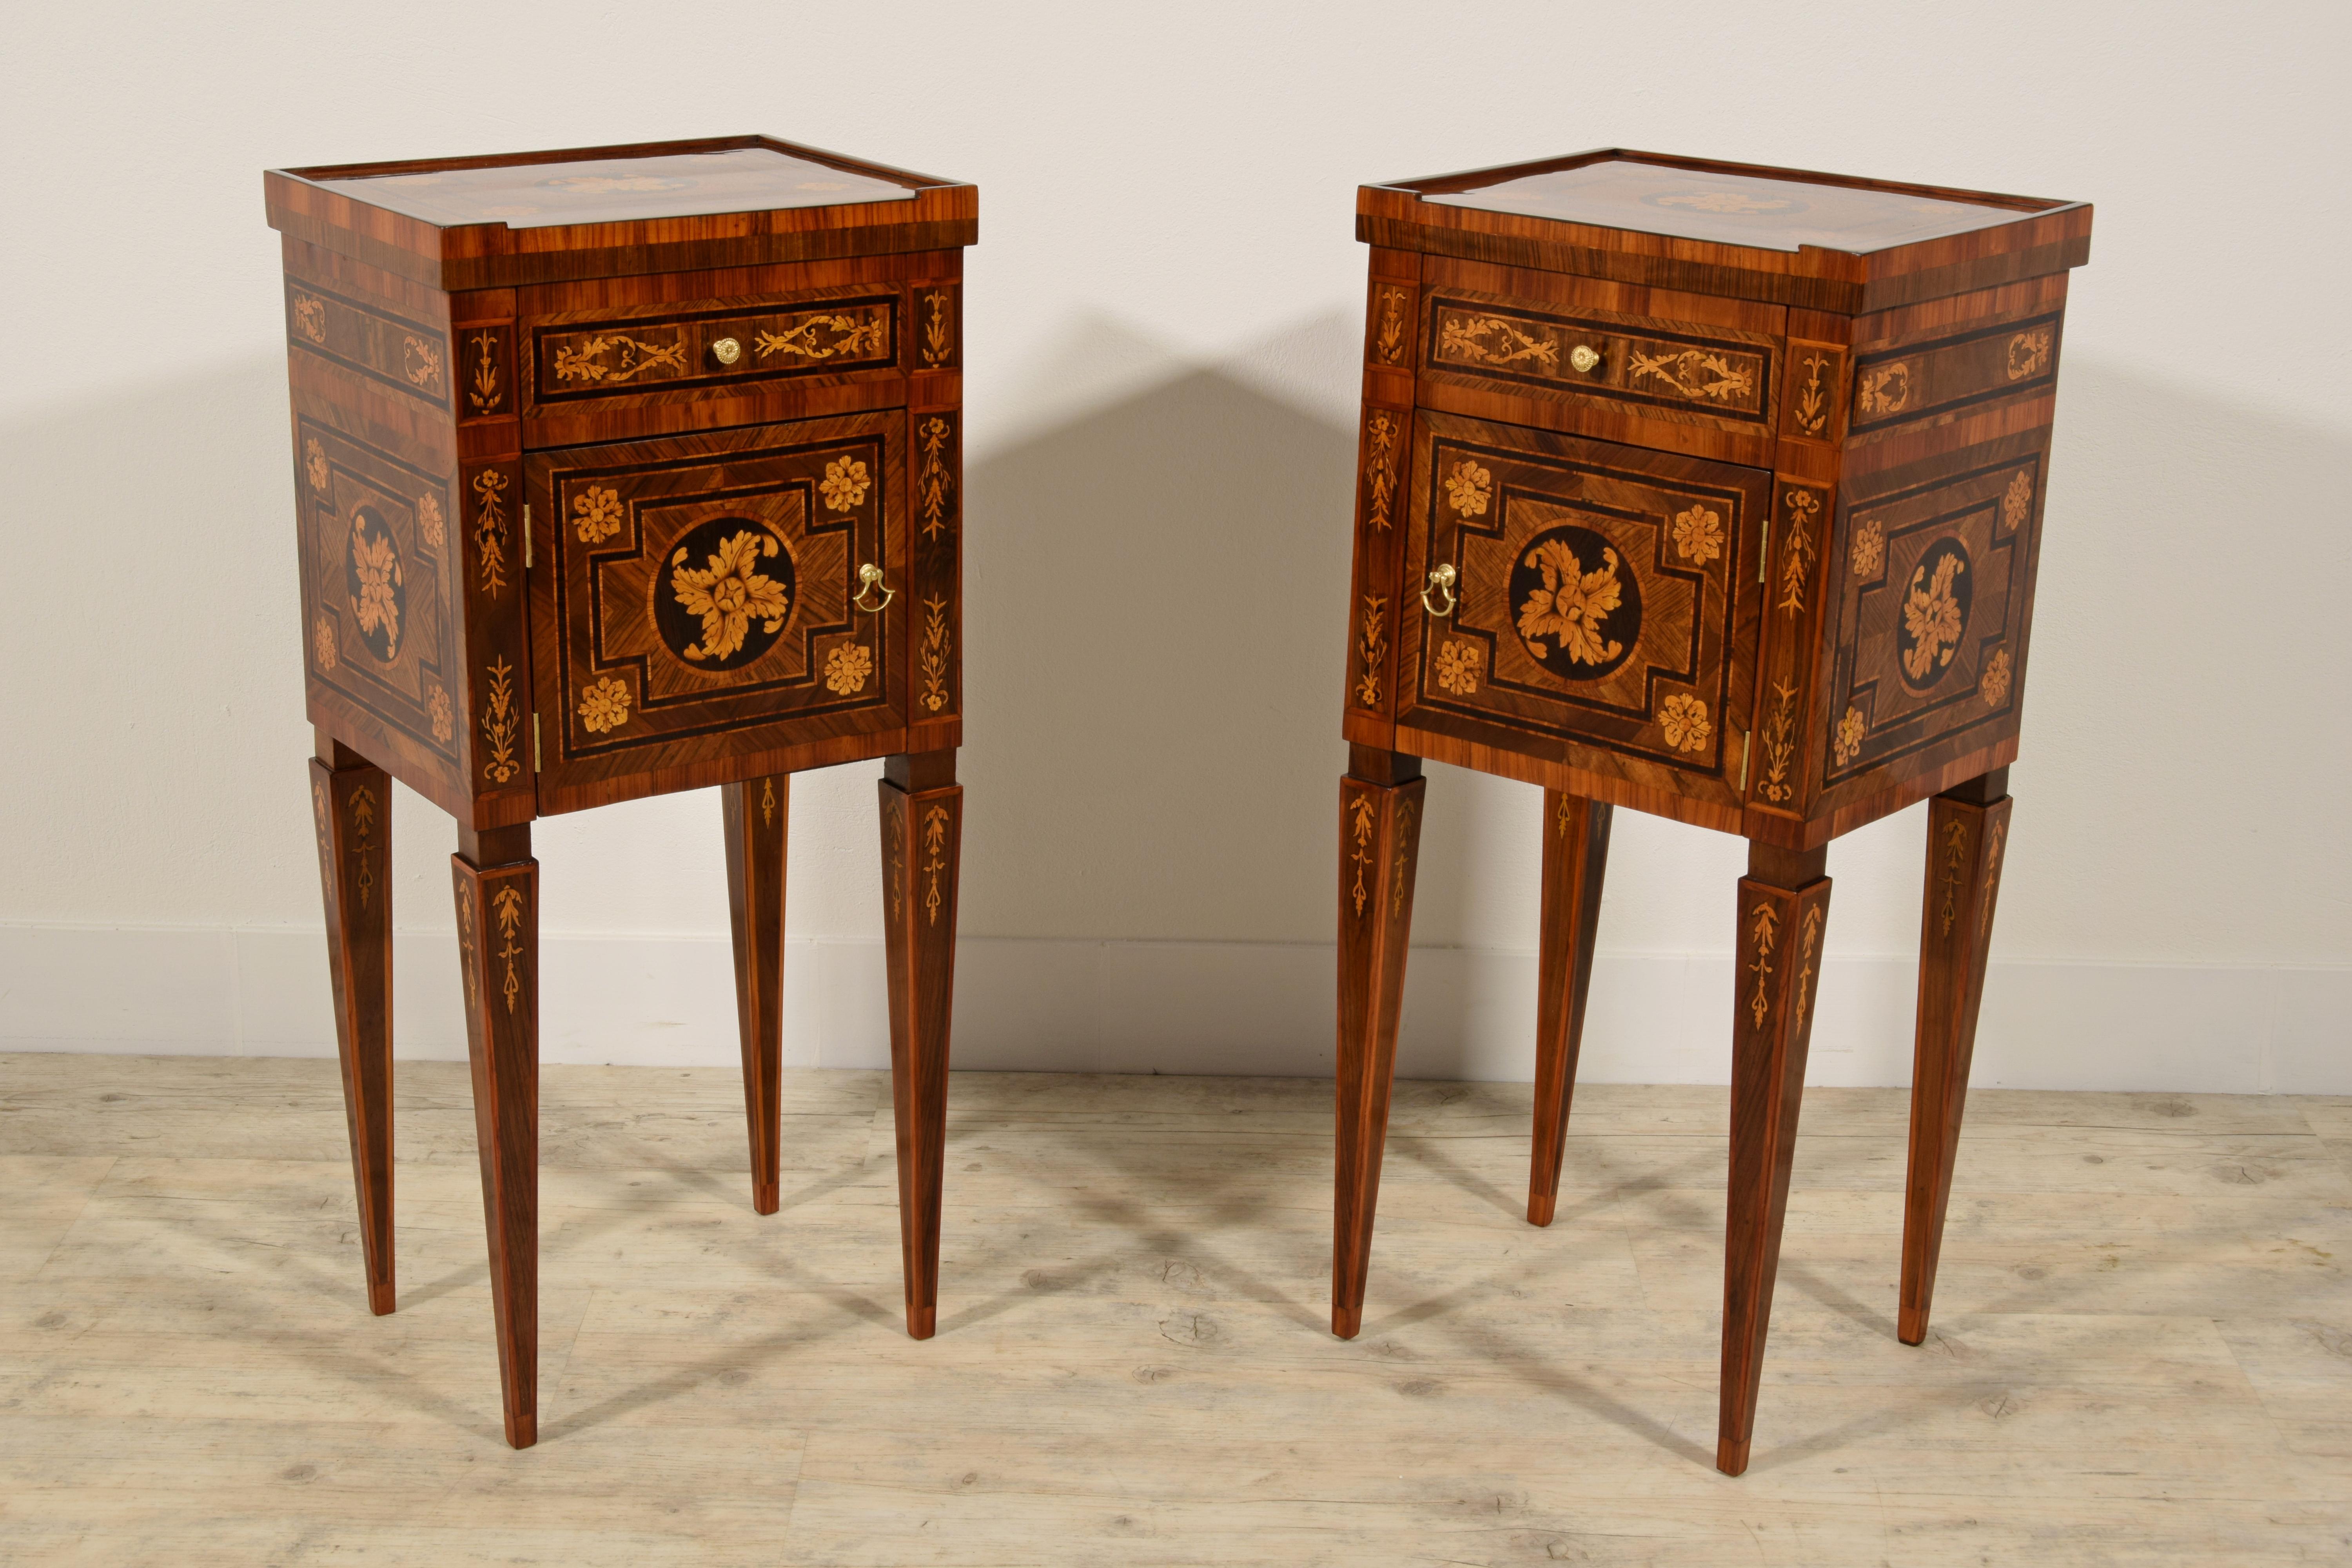 18th century, pair of Italian neoclassical inlaid wood bedside tables

This pair of elegant neoclassical bedside tables was made in Italy in the second half of the 18th century. Each bedside table is equipped with a small drawer and a door. The